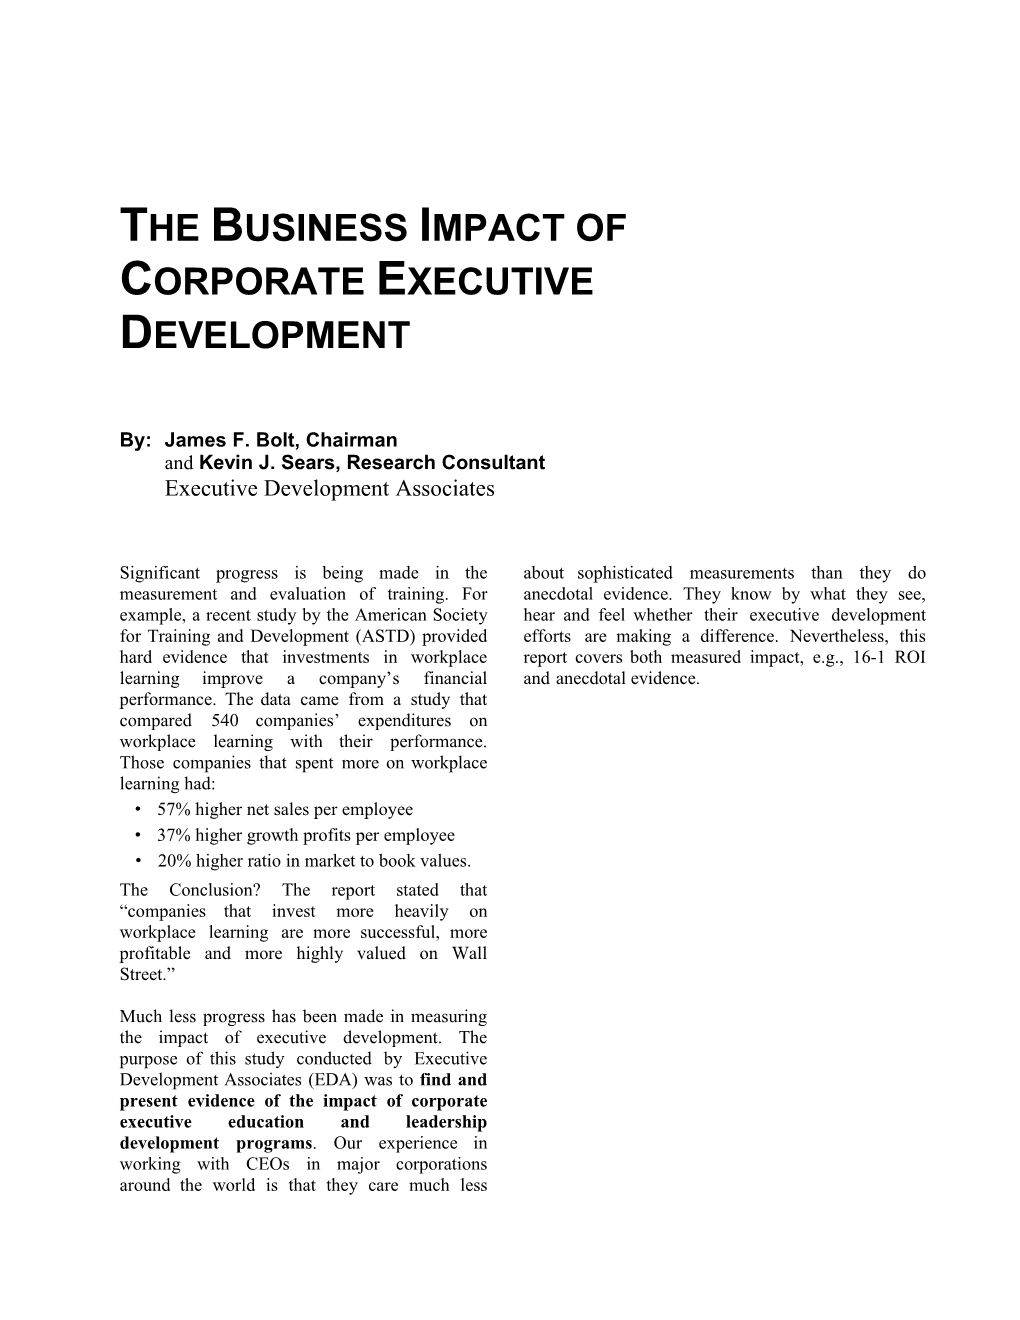 The Business Impact of Corporate Executive Development